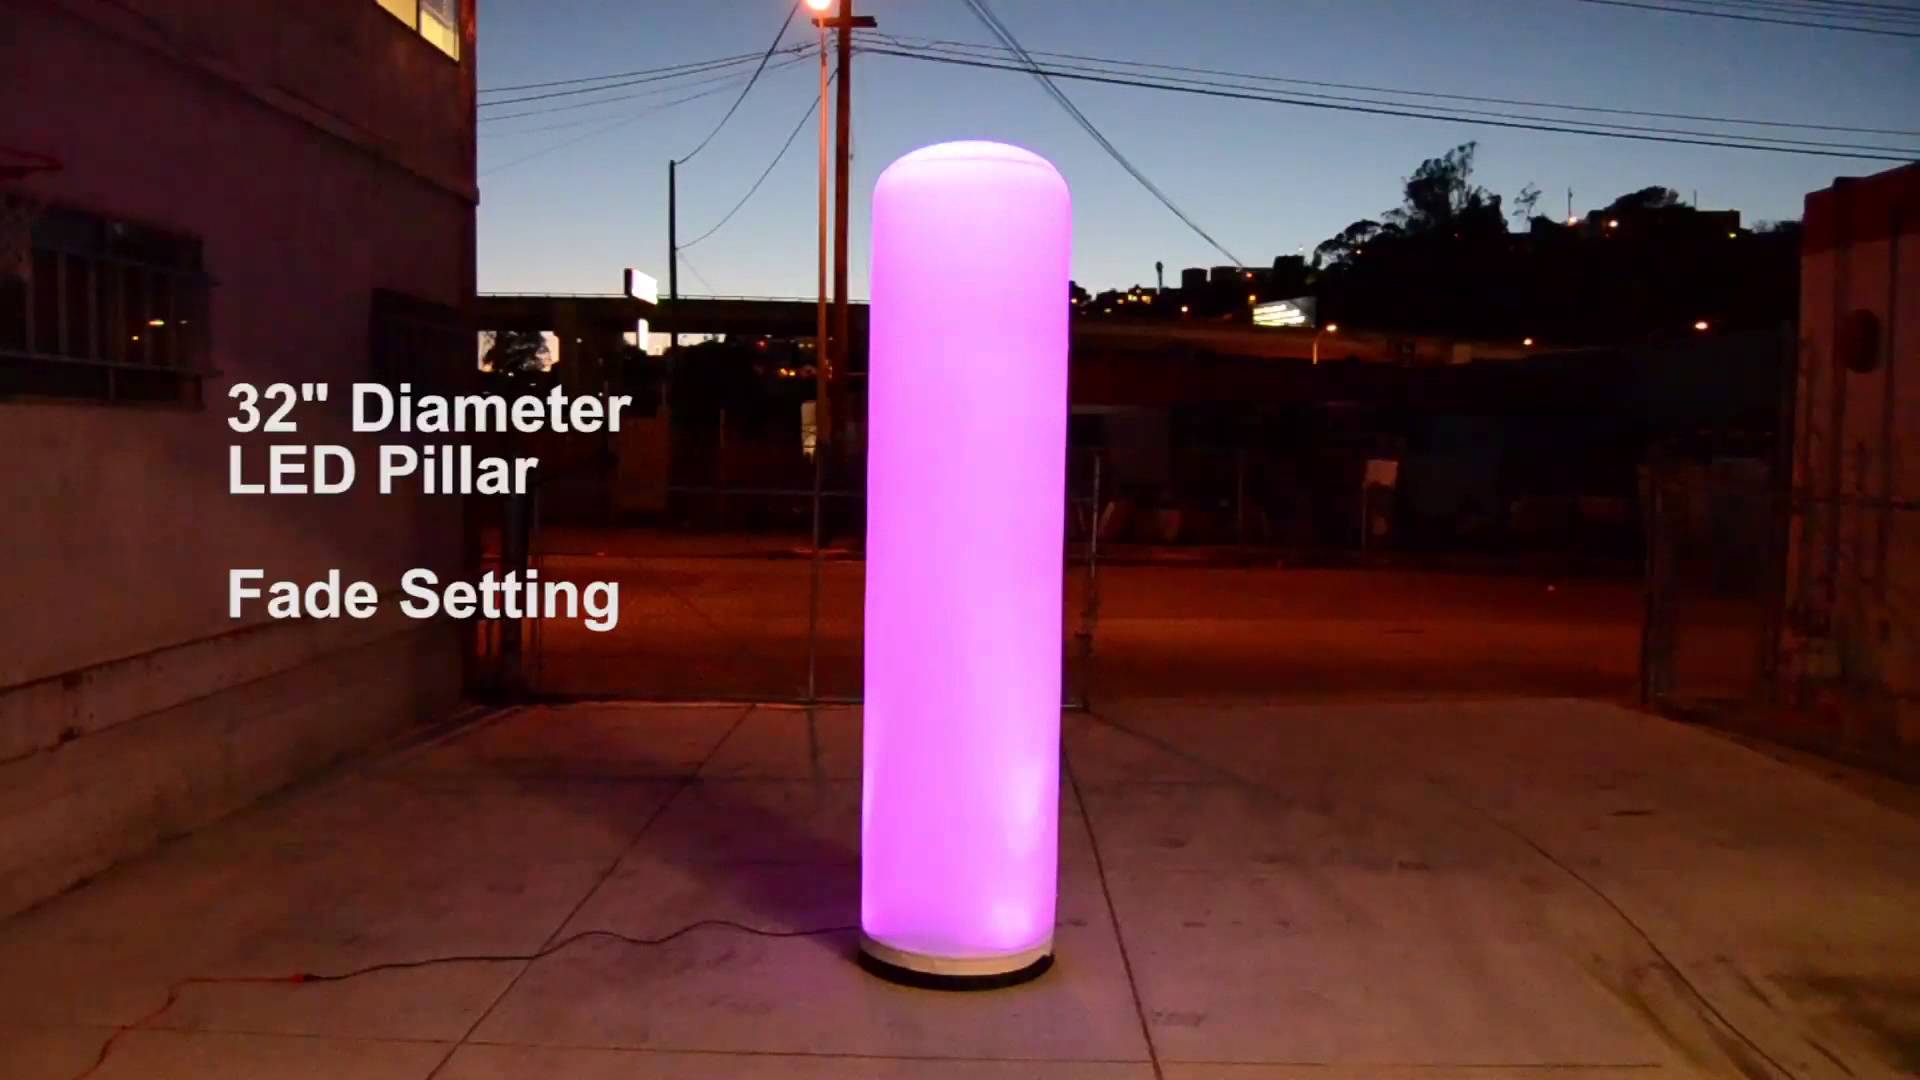 Inflatable Advertising LED Pillars by LookOurWay - YouTube